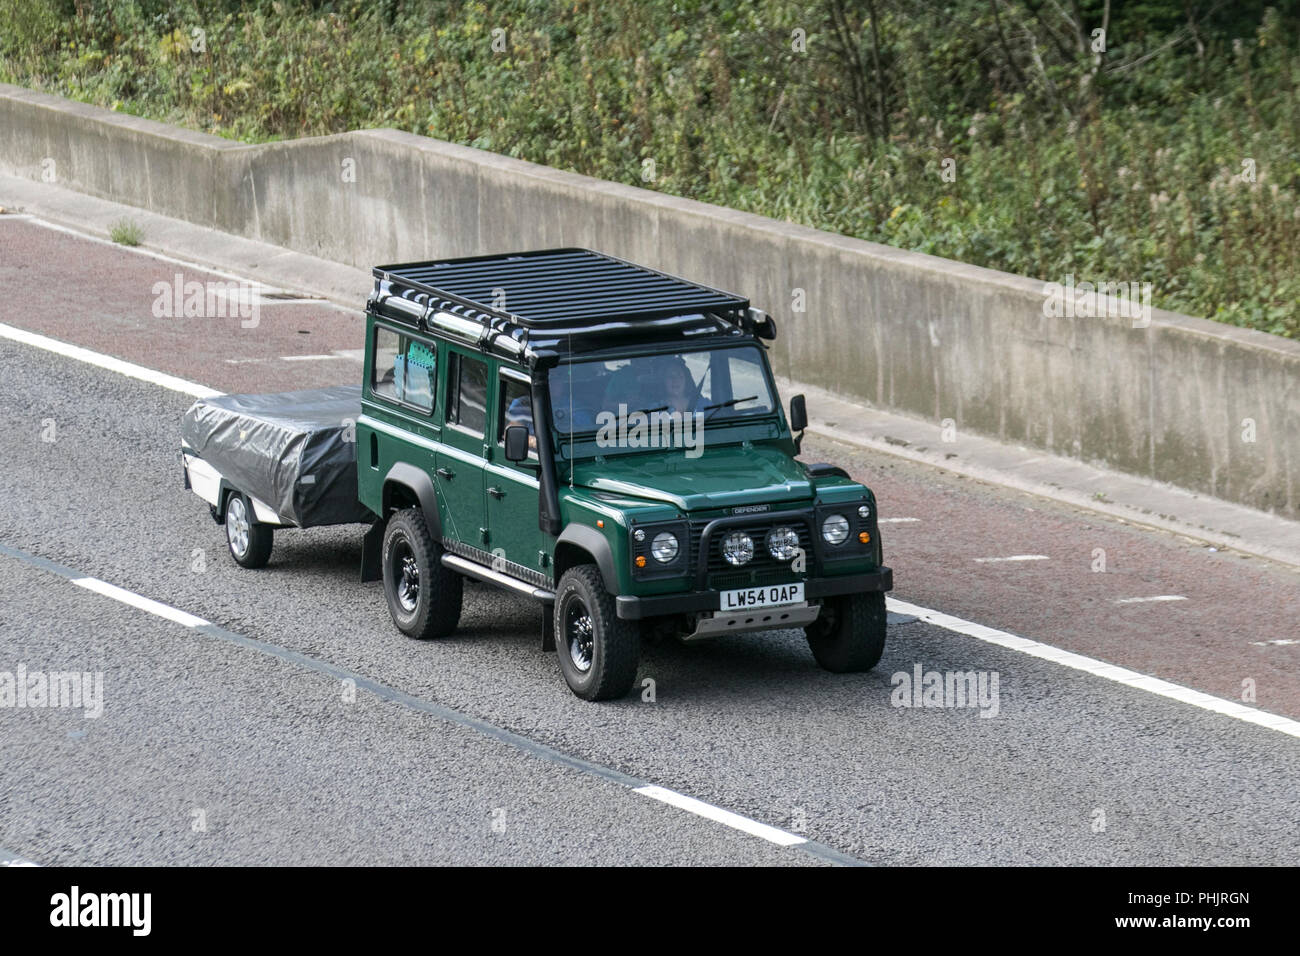 2005 (54) Land Rover Defender 110 County TD5 with snorkel exhaust, leisure, off-road, vehicle rugged, with a trailer on the M6 motorway, UK Stock Photo